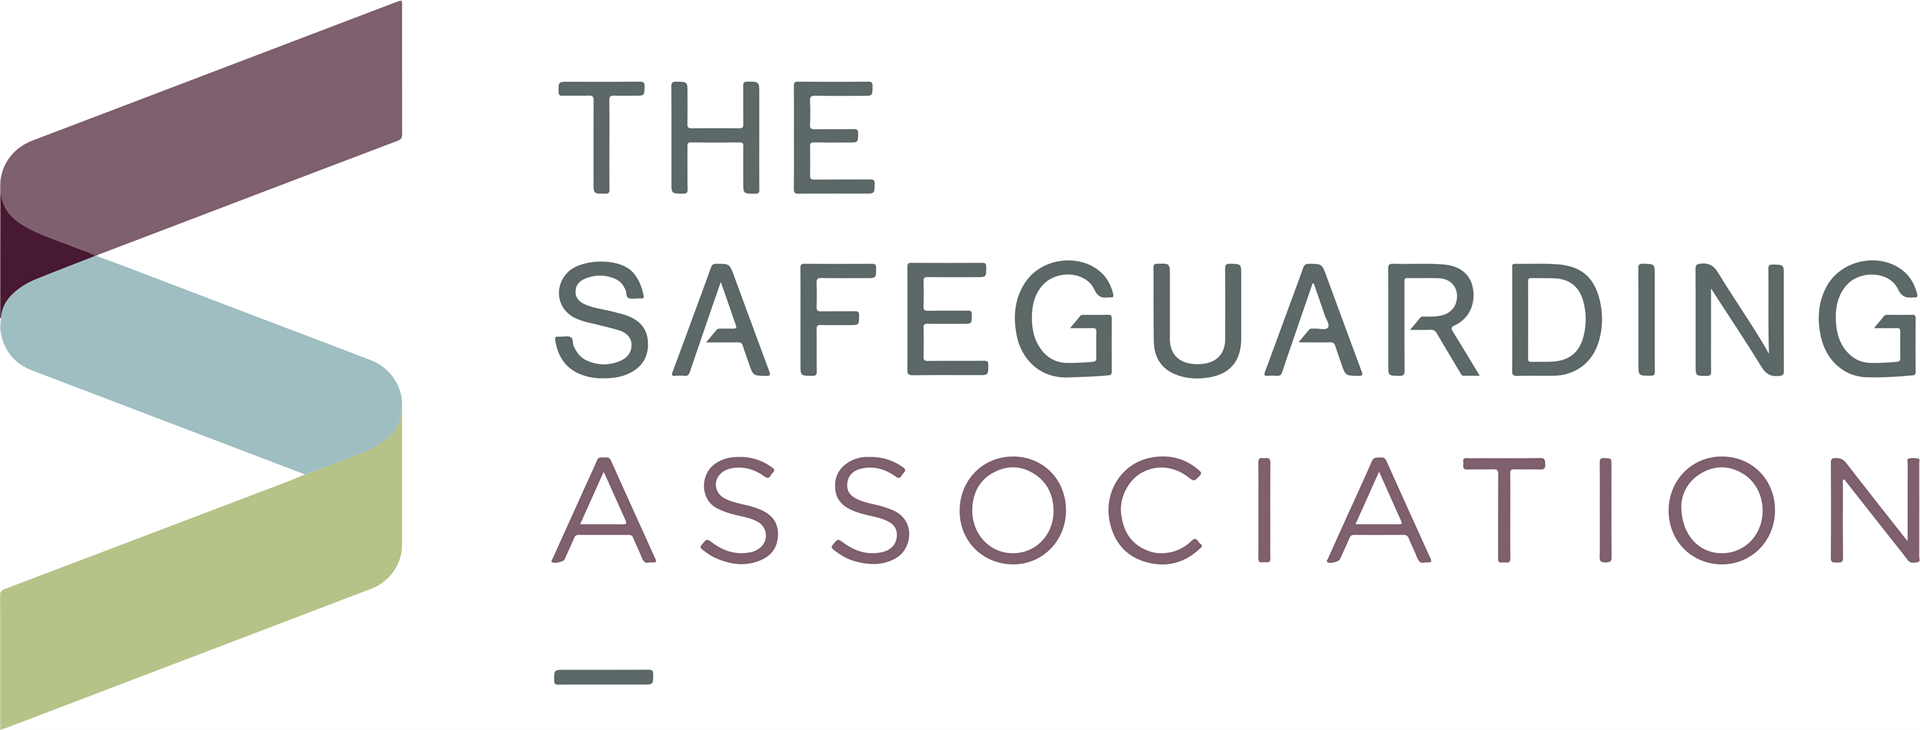 Safeguarding Association (opens in a new window)